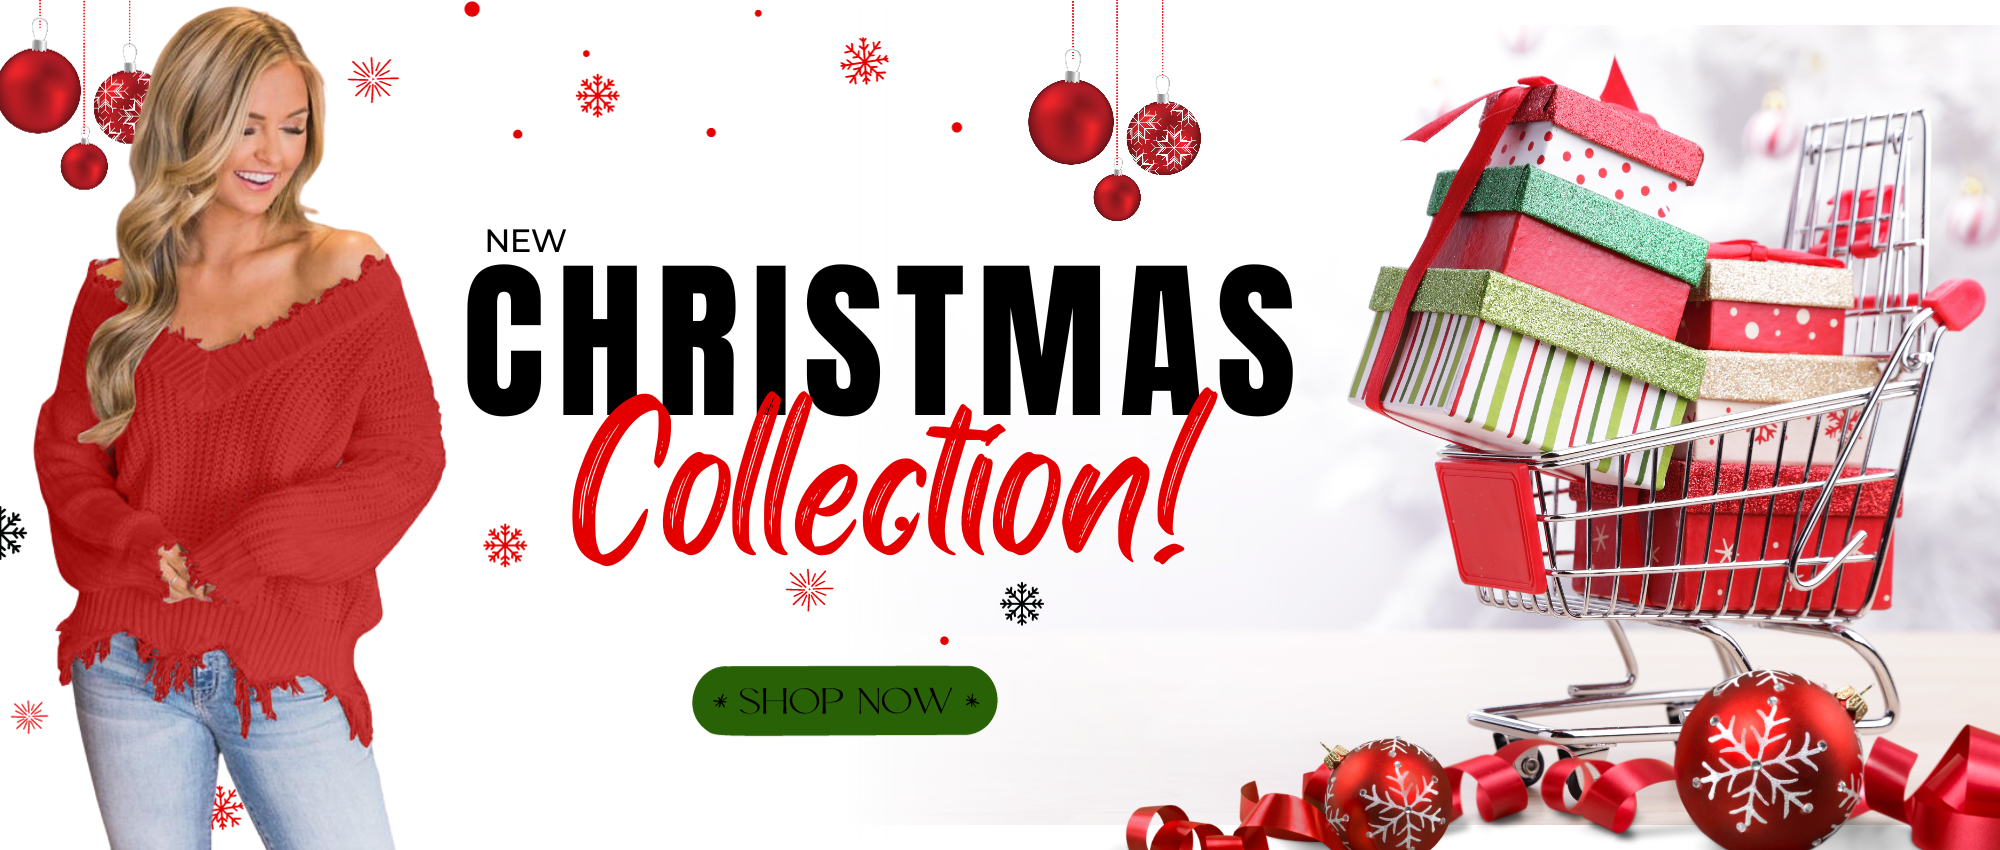 Christmas Inspired Banners - Boutique Marketing Studio